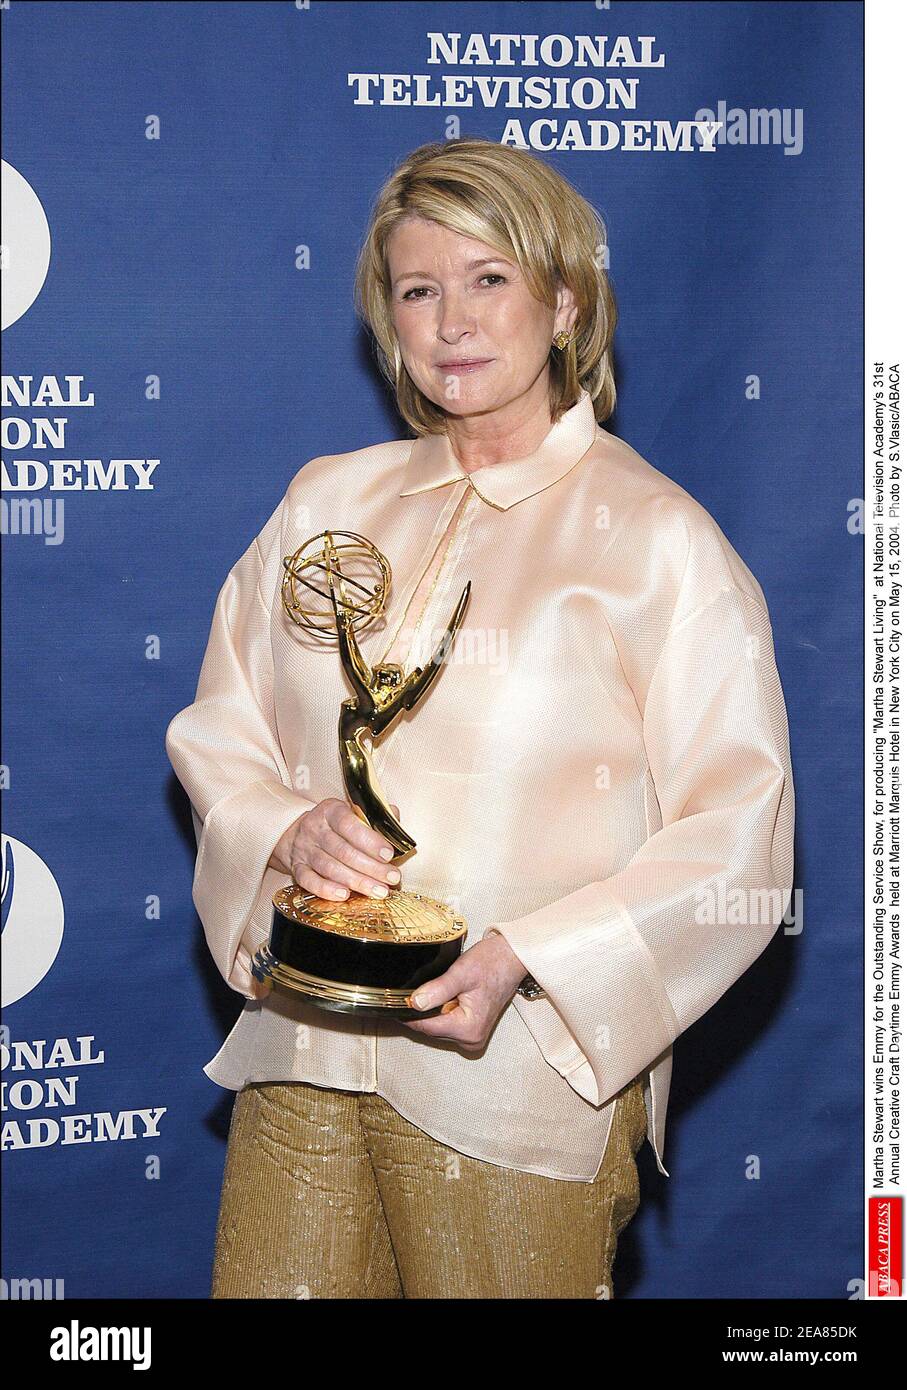 Martha Stewart wins Emmy for the Outstanding Service Show, for producing Martha Stewart Living at National Television Academy's 31st Annual Creative Craft Daytime Emmy Awards held at Marriott Marquis Hotel in New York City on May 15, 2004. Photo by S.Vlasic/ABACA Stock Photo